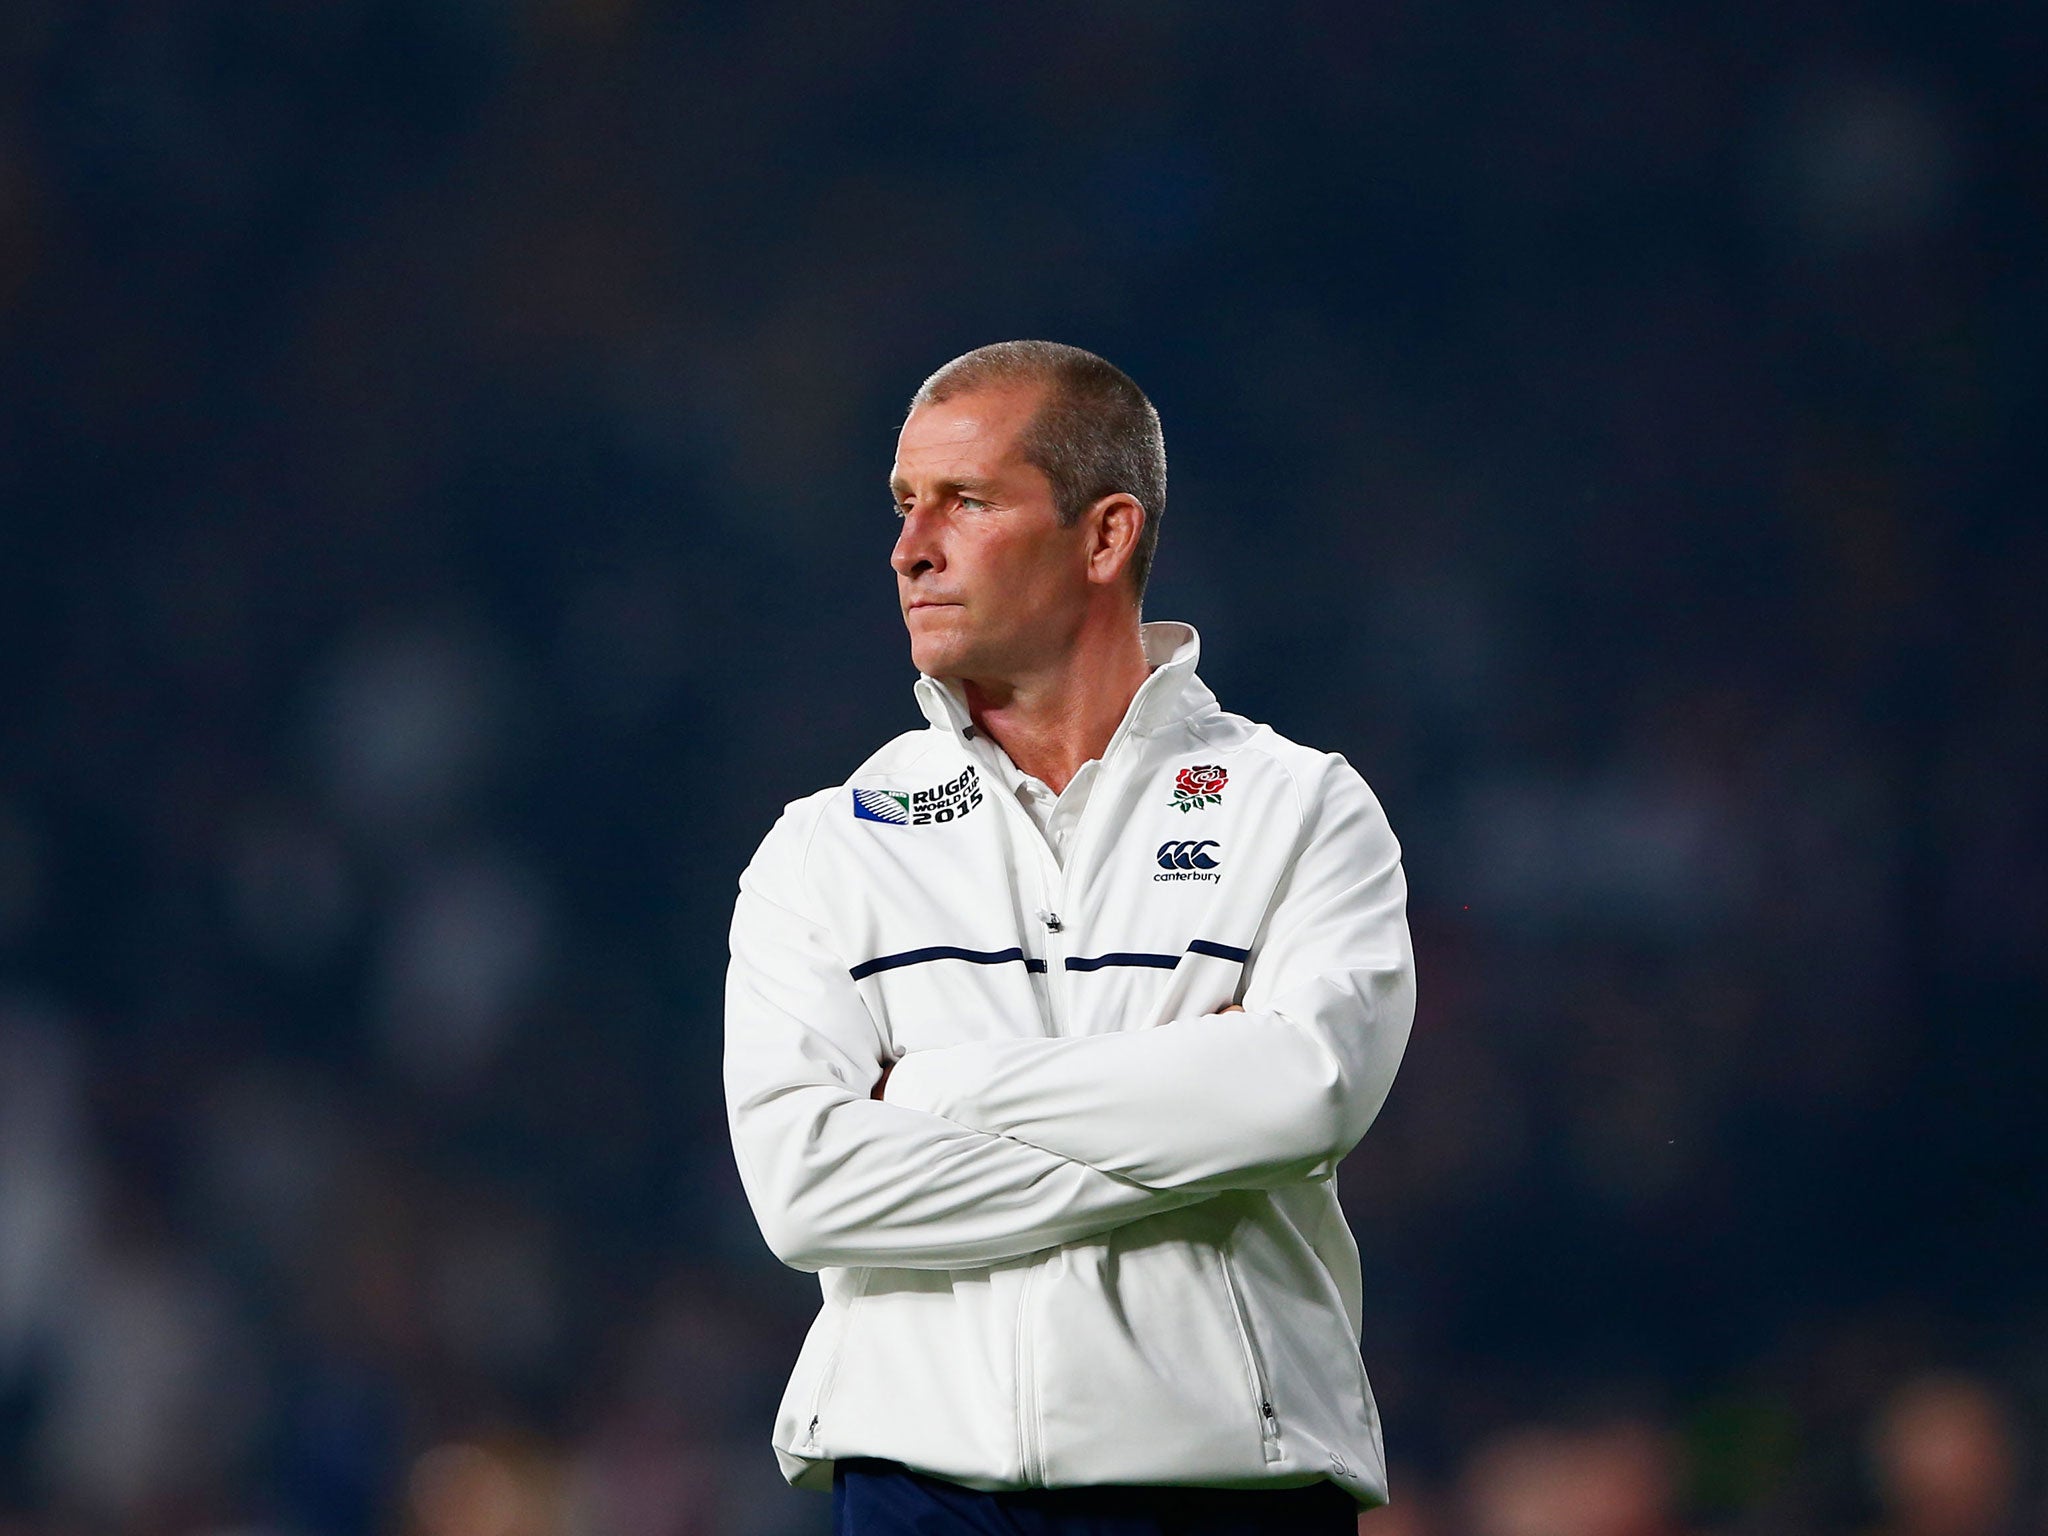 Stuart Lancaster lost his job following England's disastrous World Cup campaign